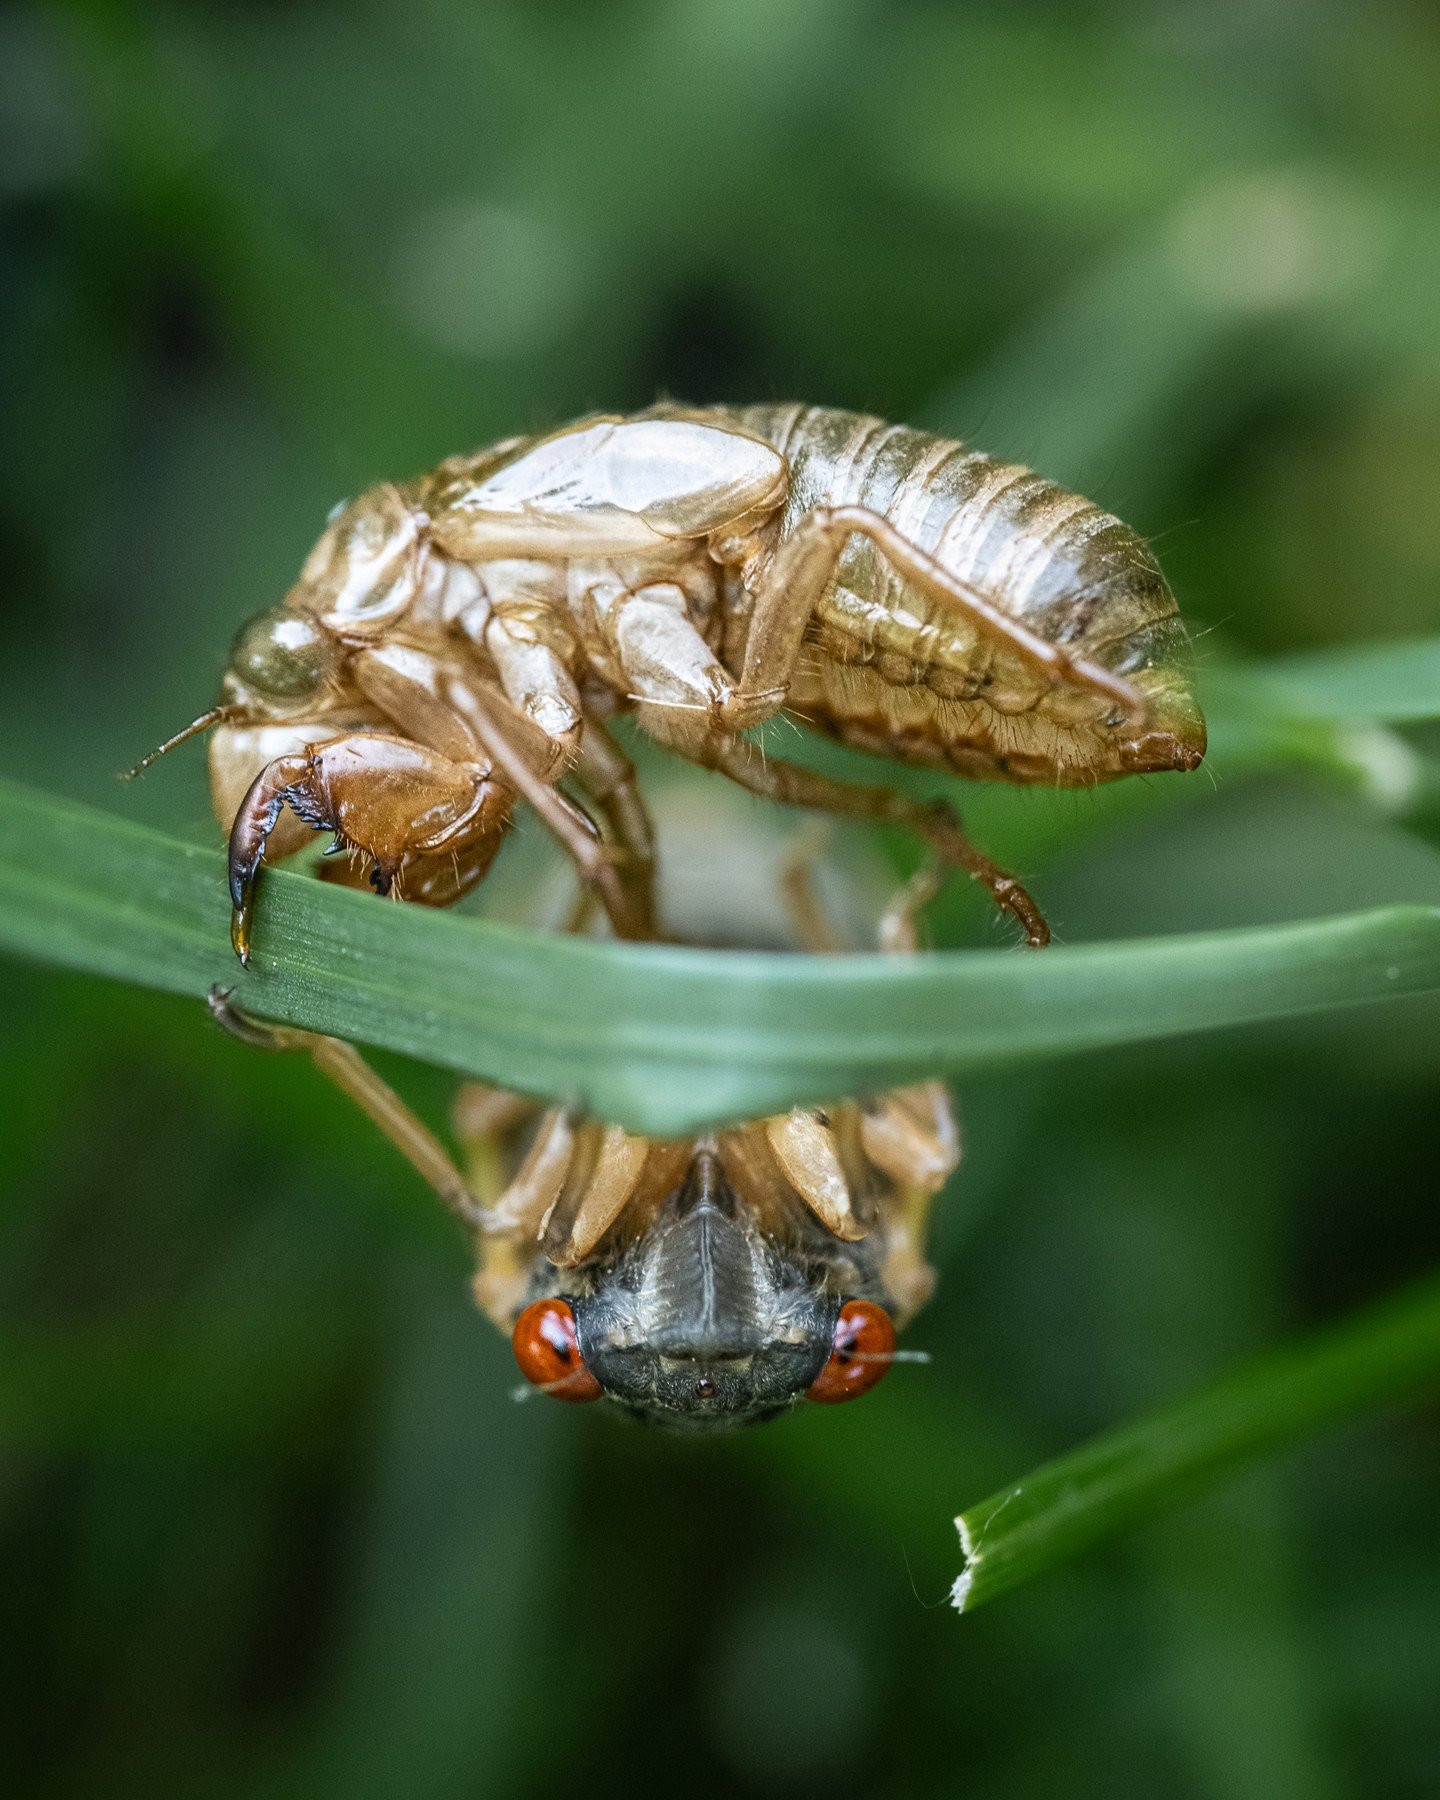 And so it begins... walking the kids to school today, we noticed cicadas starting to pop through the ground, hanging onto the blades of grass in our yard. Their shells are littering the sidewalk. Although we've been waiting for signs of them for week